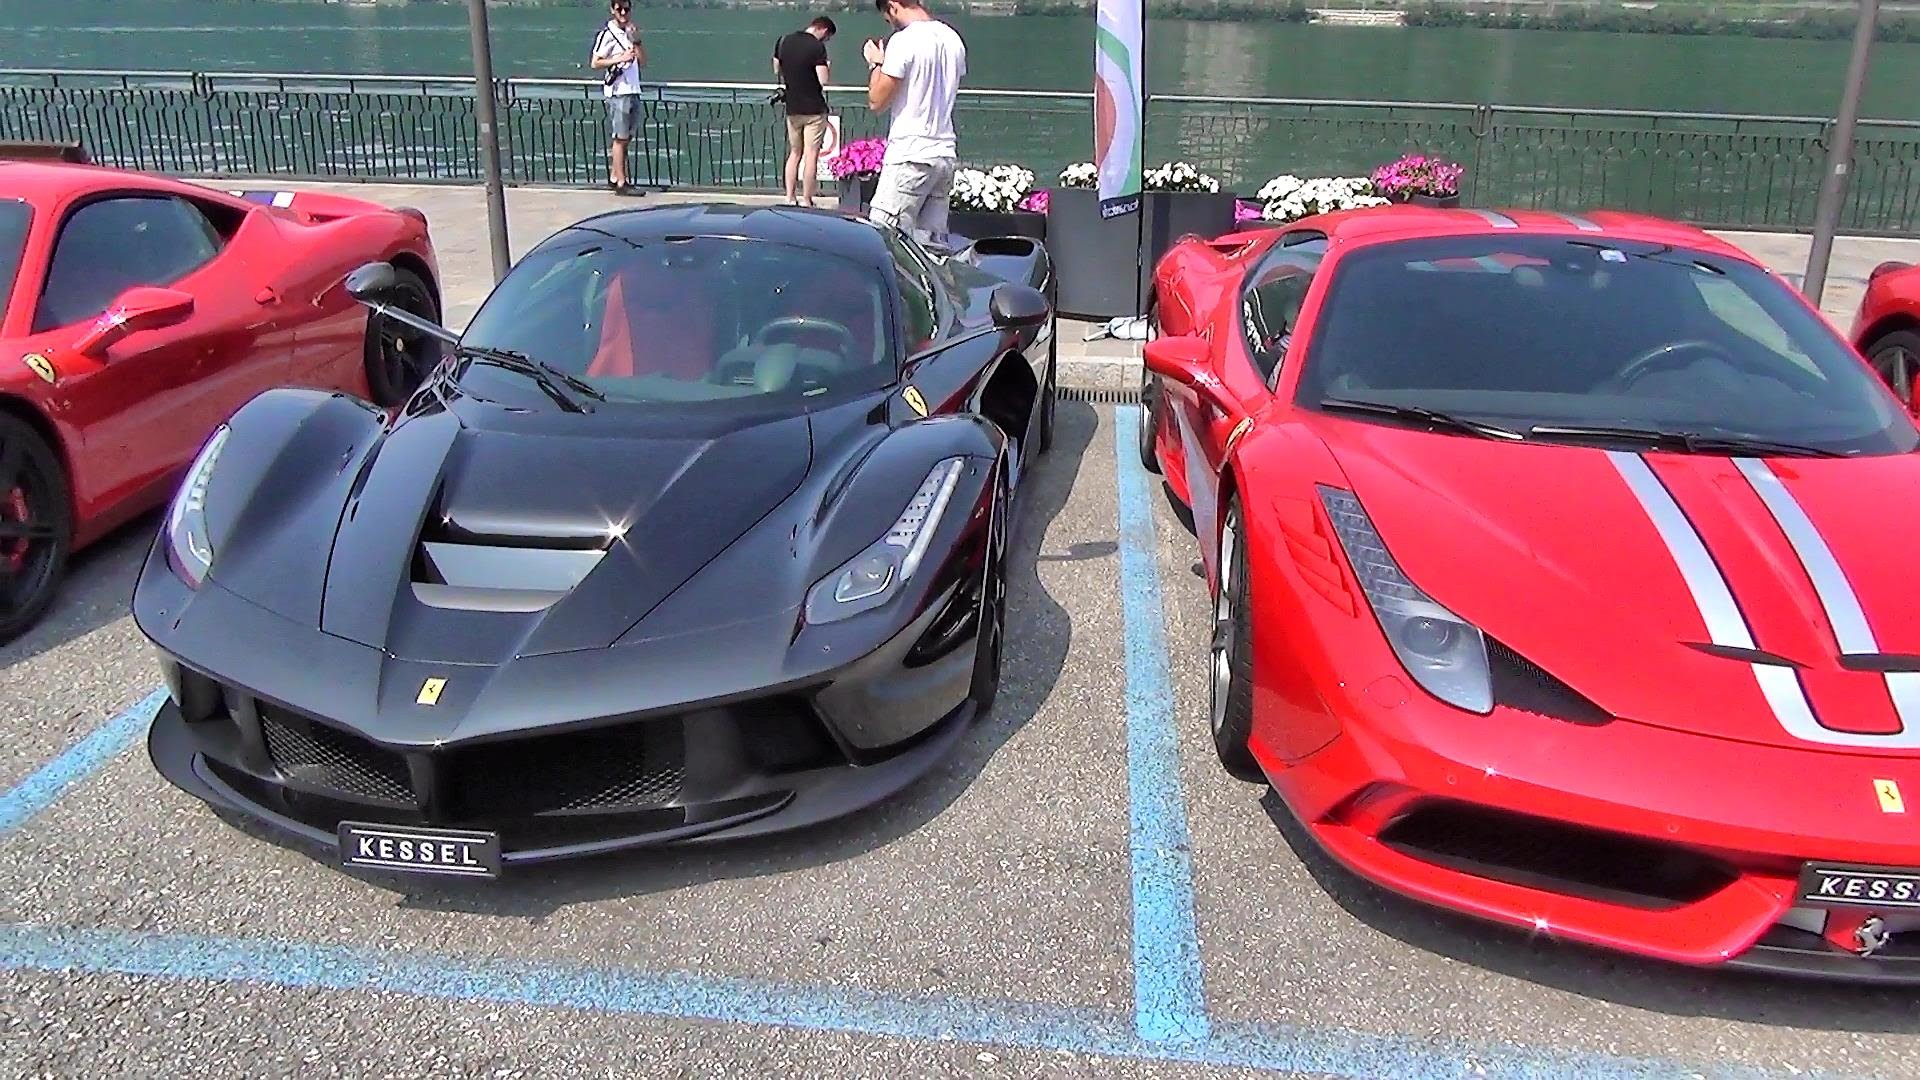 100 Supercars Arrivals and Parade at Cars and Coffee. Campione d’ Italia – Lugano. 2016